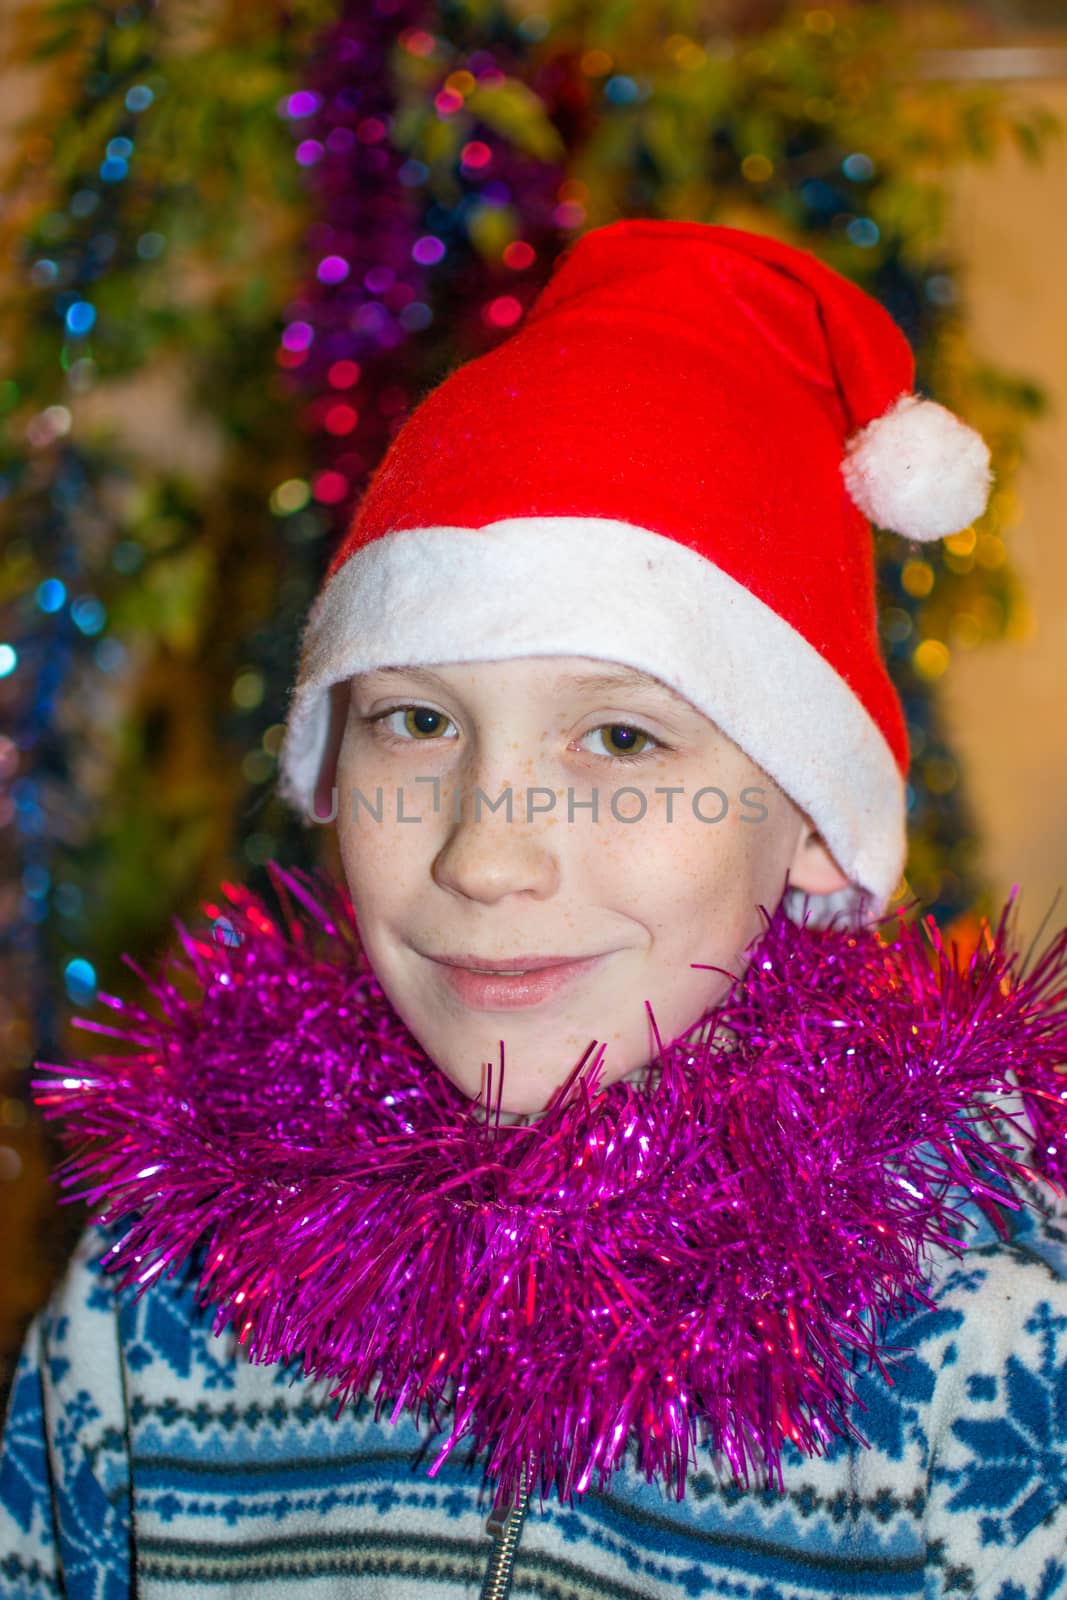 The teenage boy's portrait in a Christmas red hat